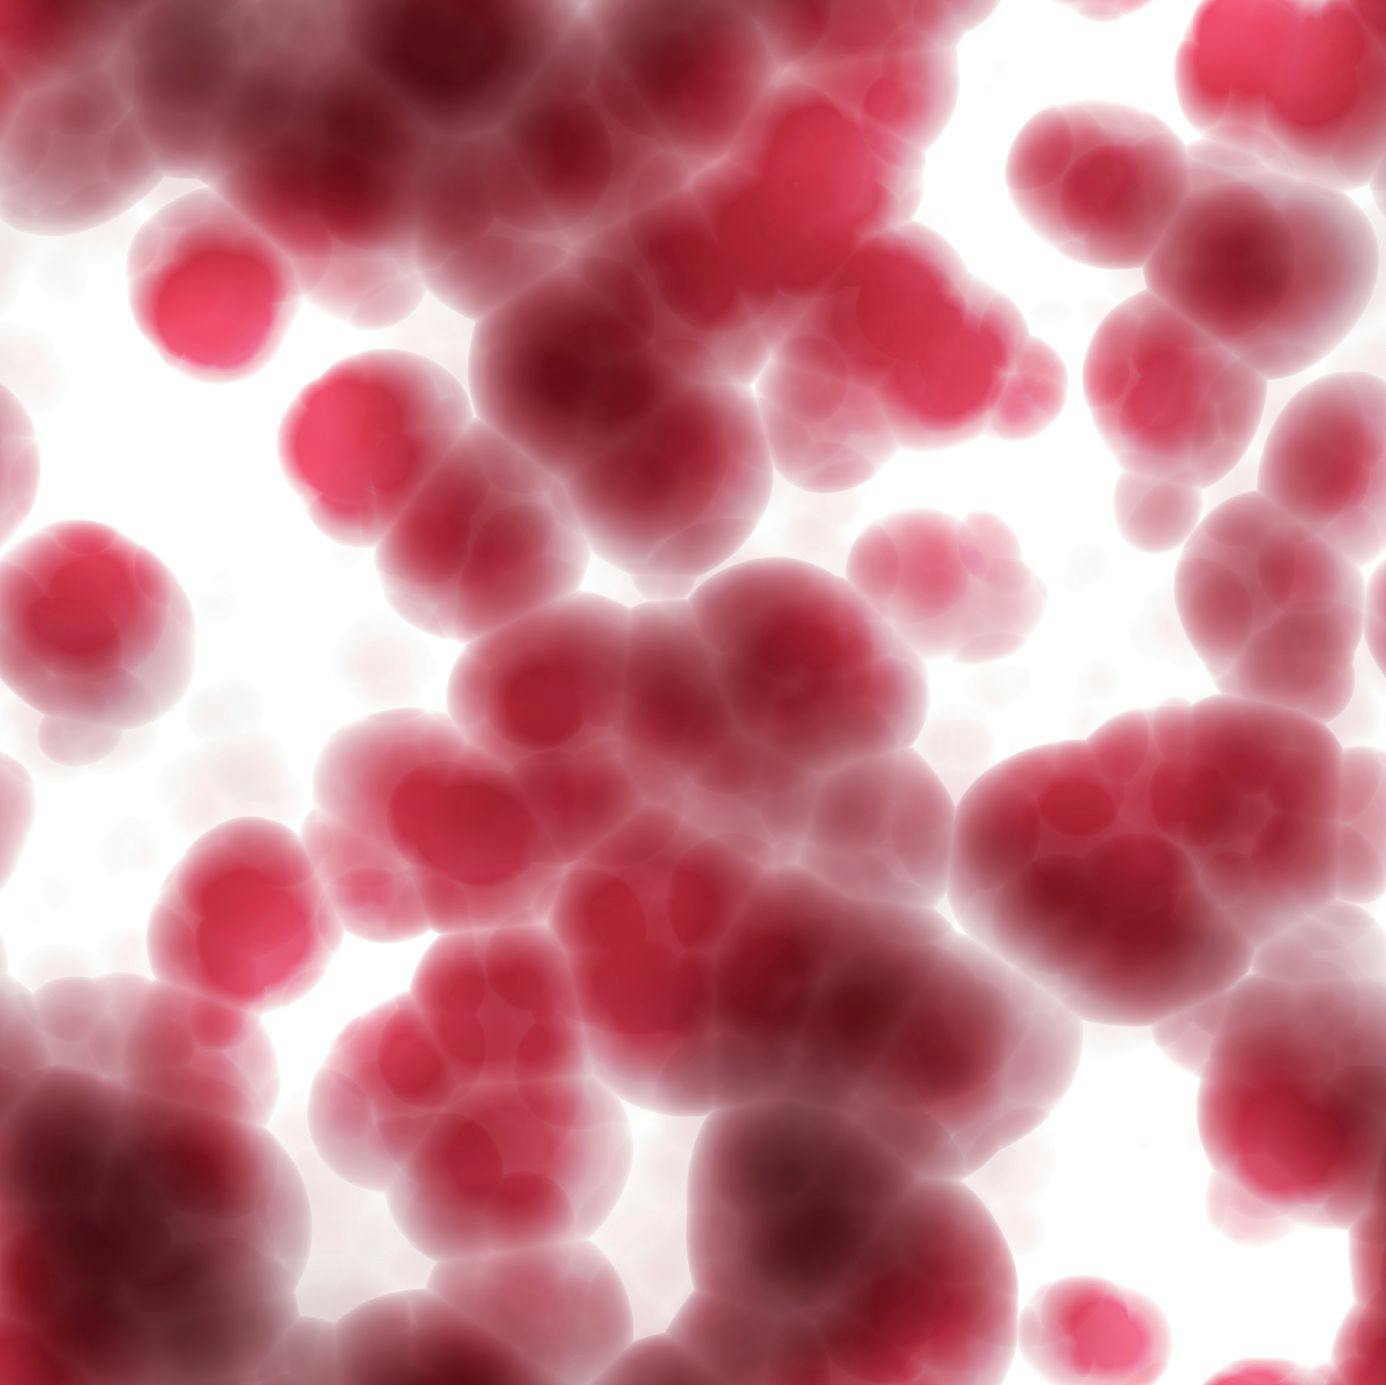 High Iron Levels in Blood Linked to Increased Risk of Liver Cancer in NAFLD